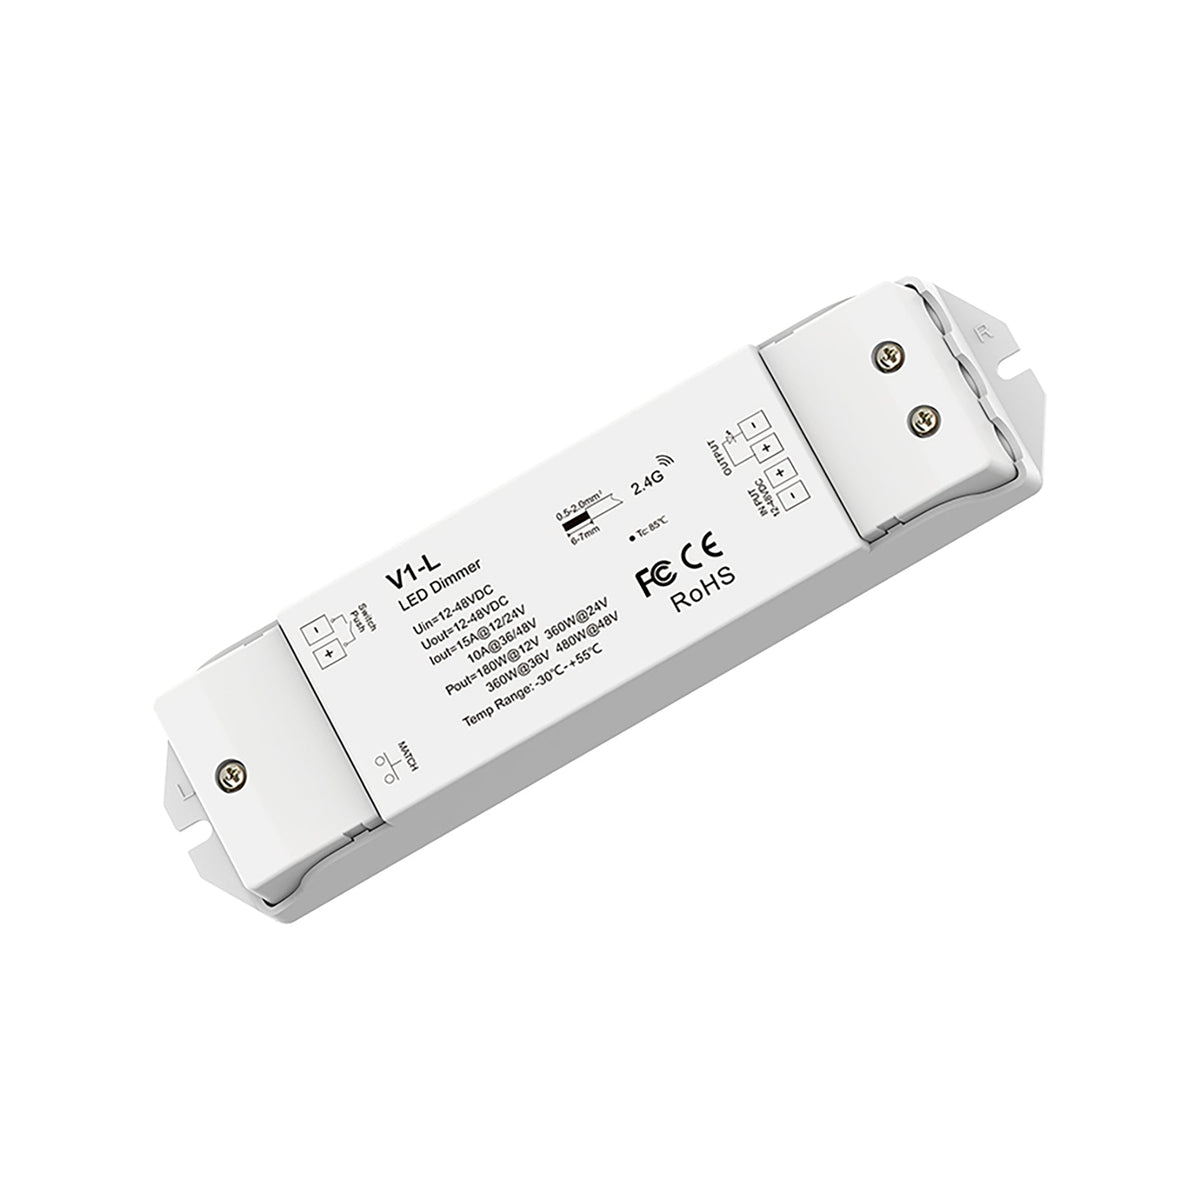 G.W.S. LED LED 12-48V DC Dimming Controller V1-L + 8 Zone Remote Control RT8